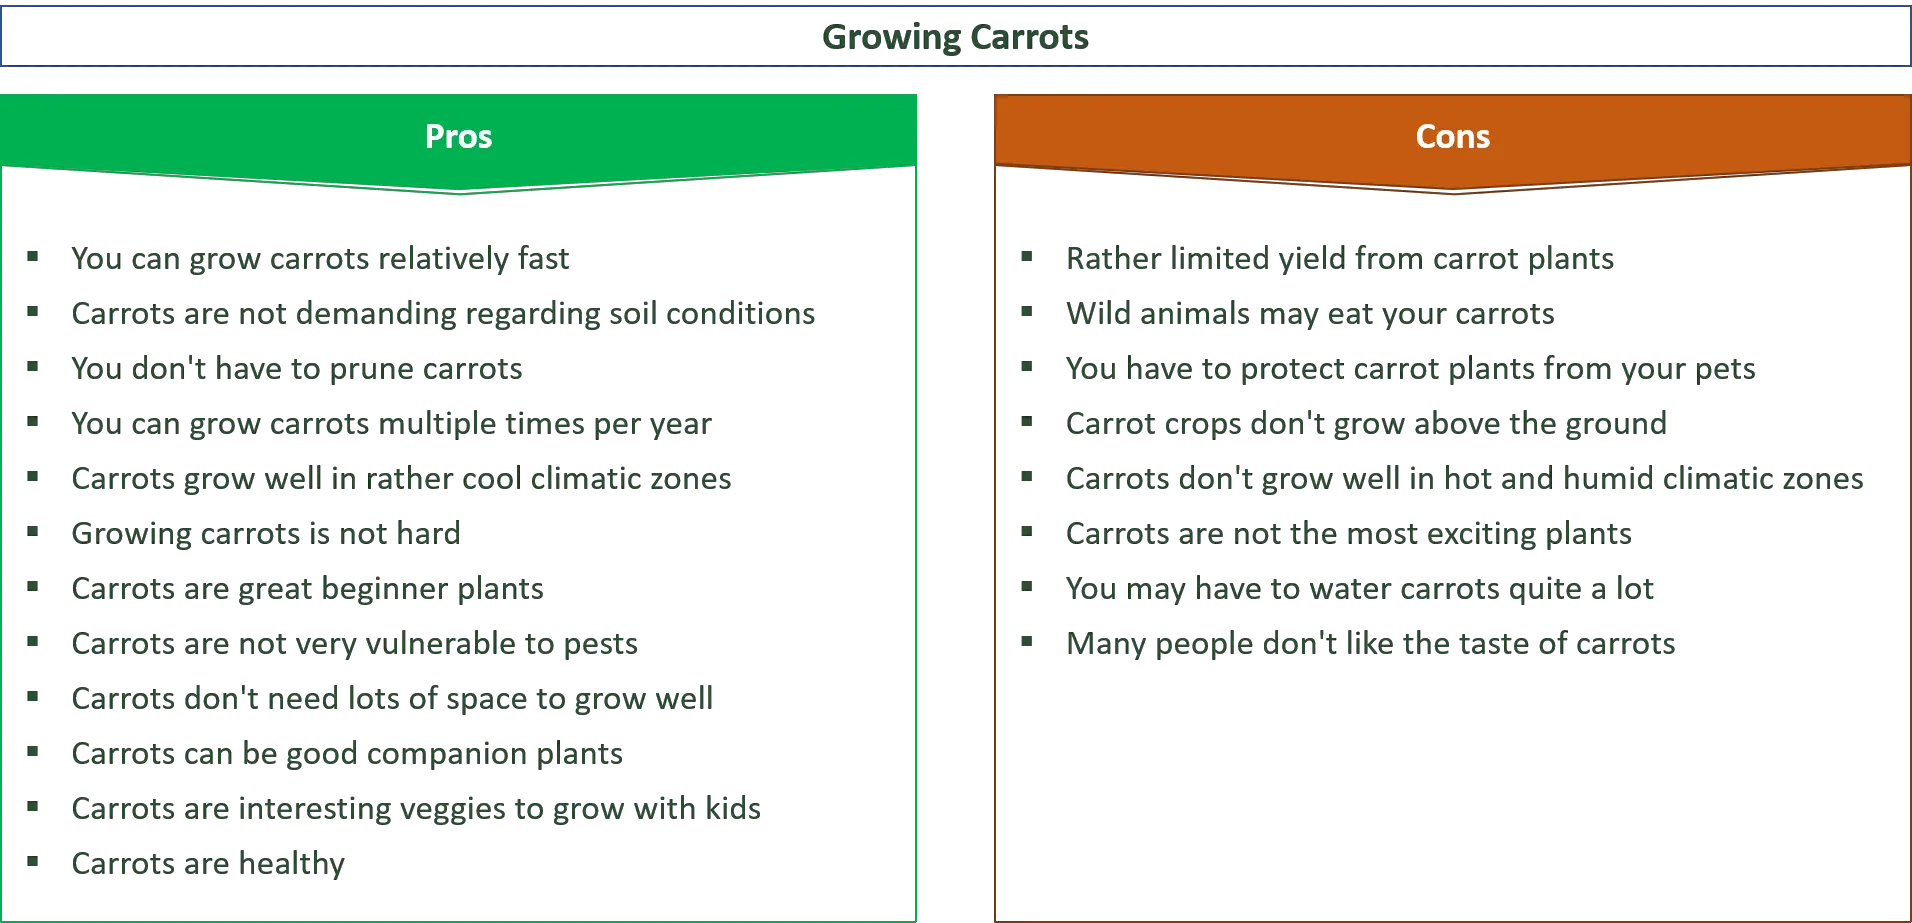 advantages and disadvantages of growing carrots